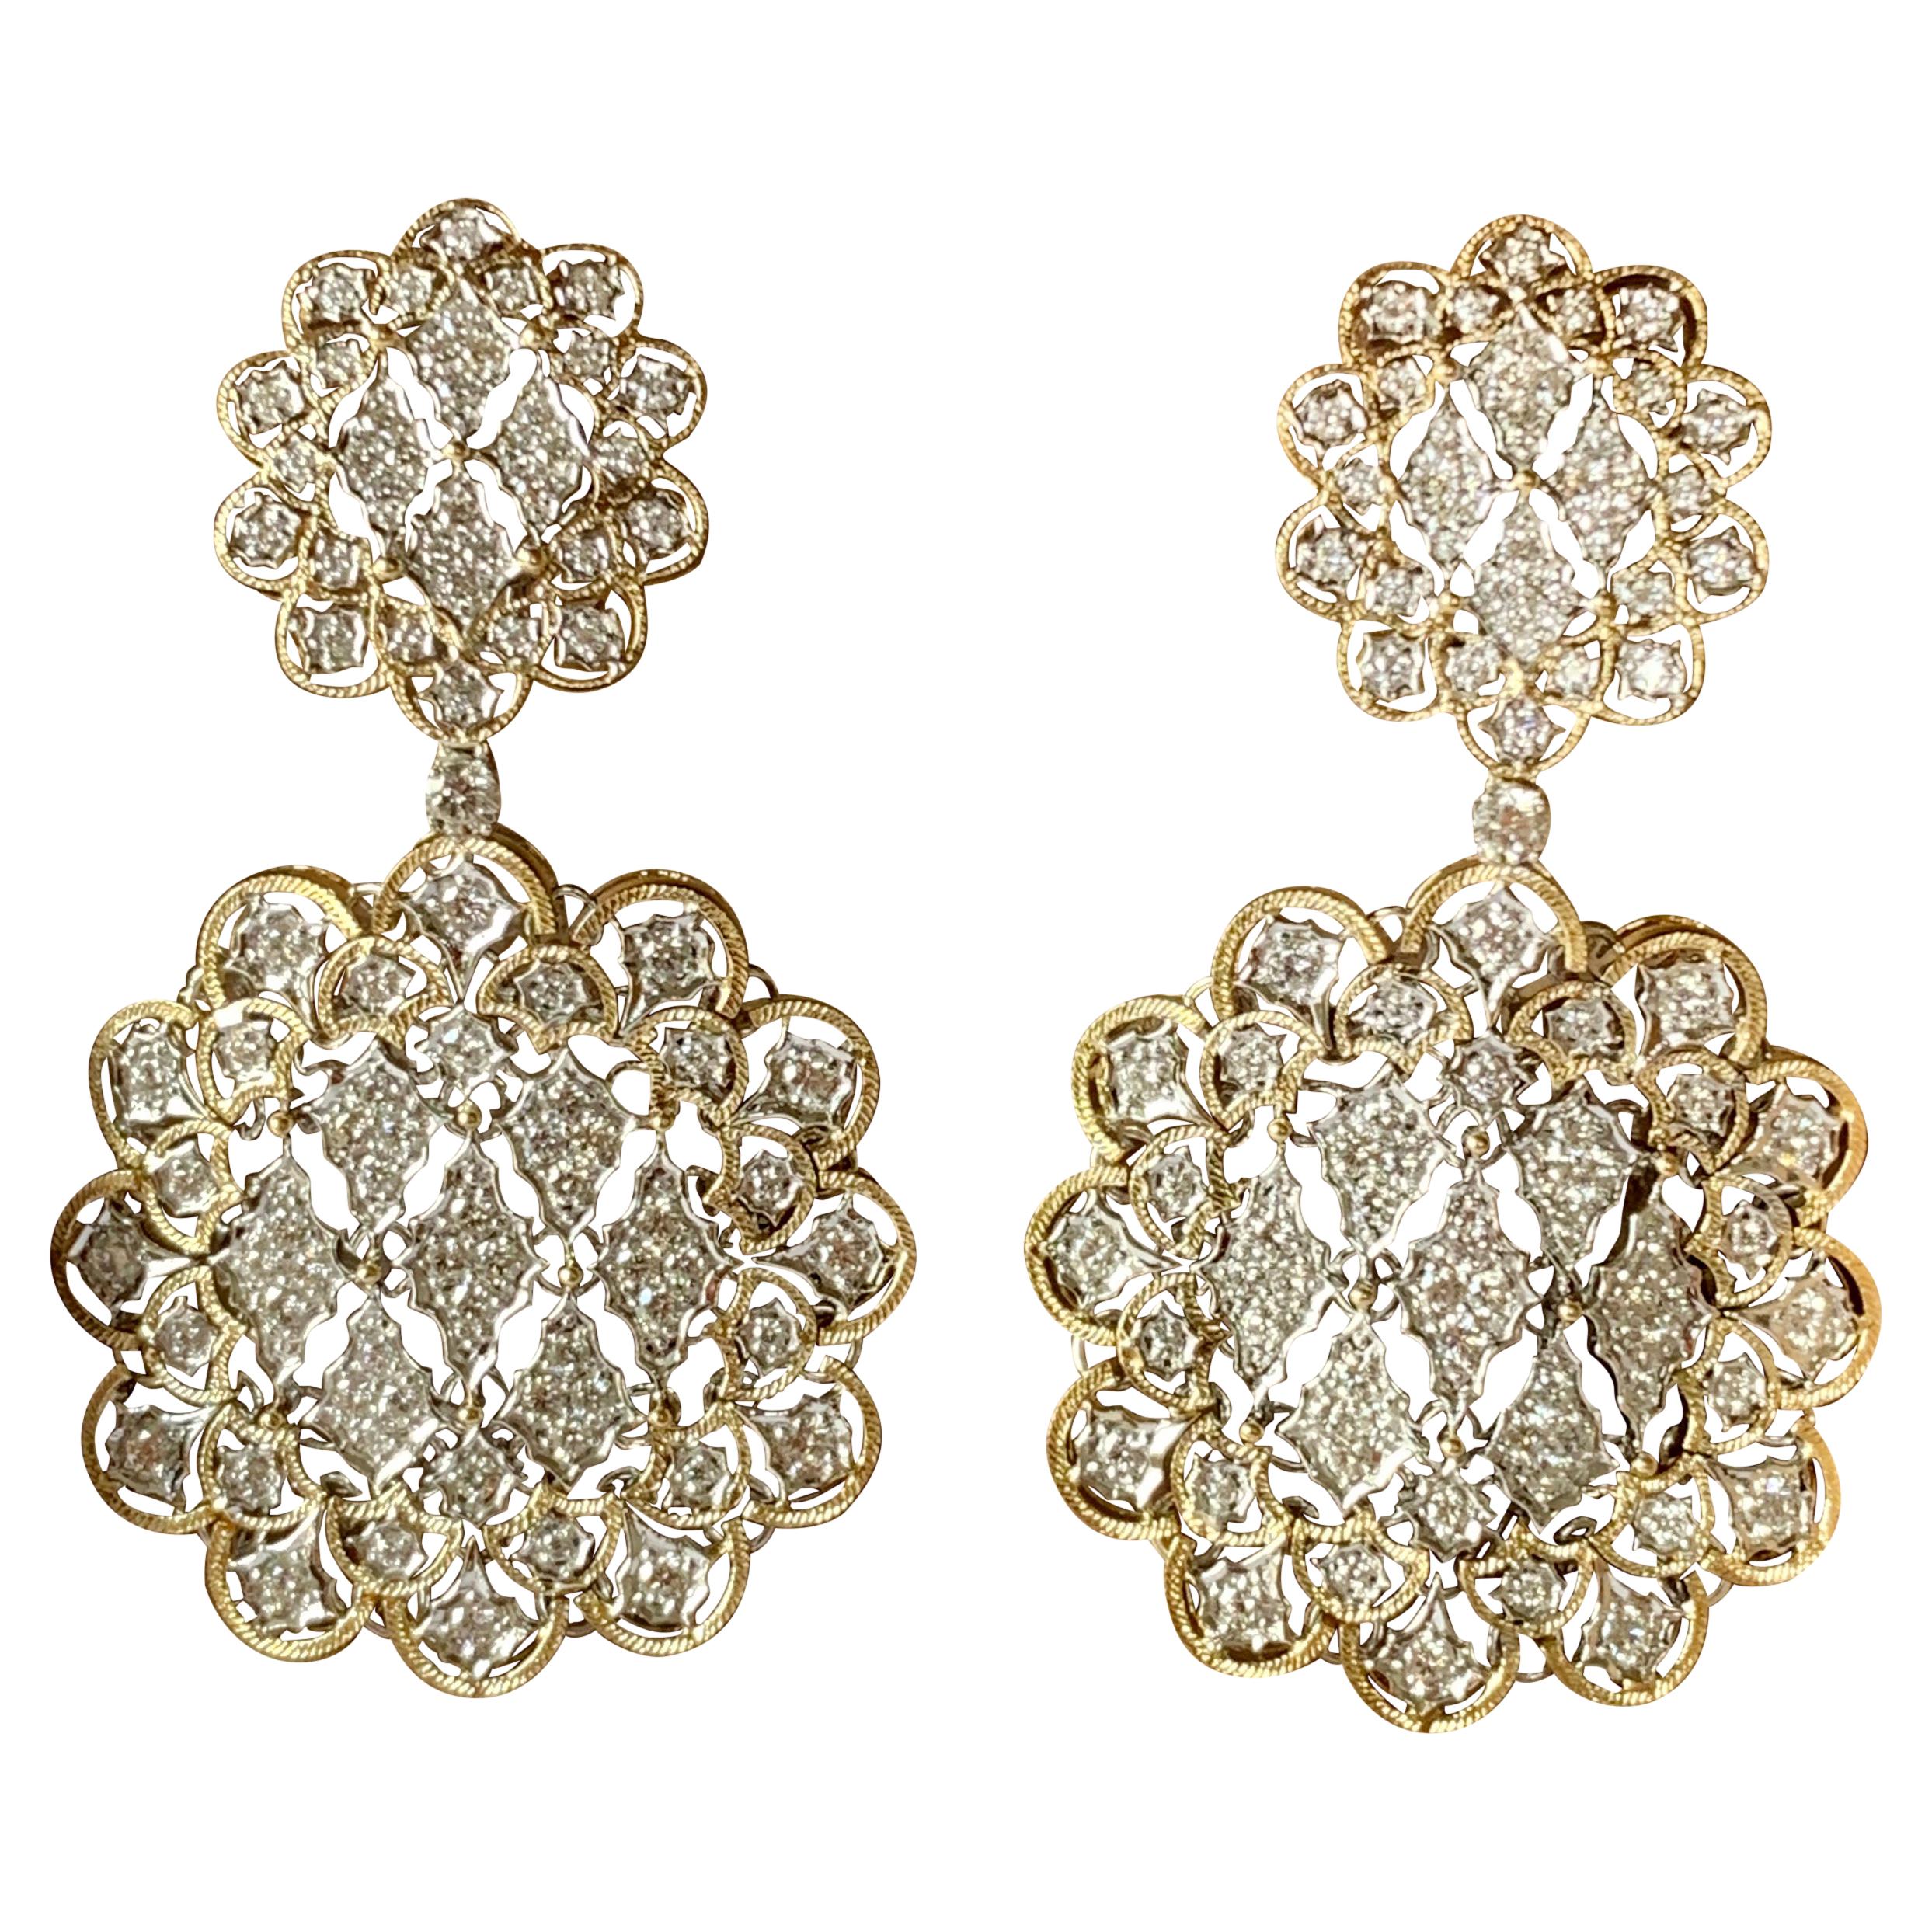 Pair of Glorious 18 Karat White and Yellow Gold Earrings with Diamonds